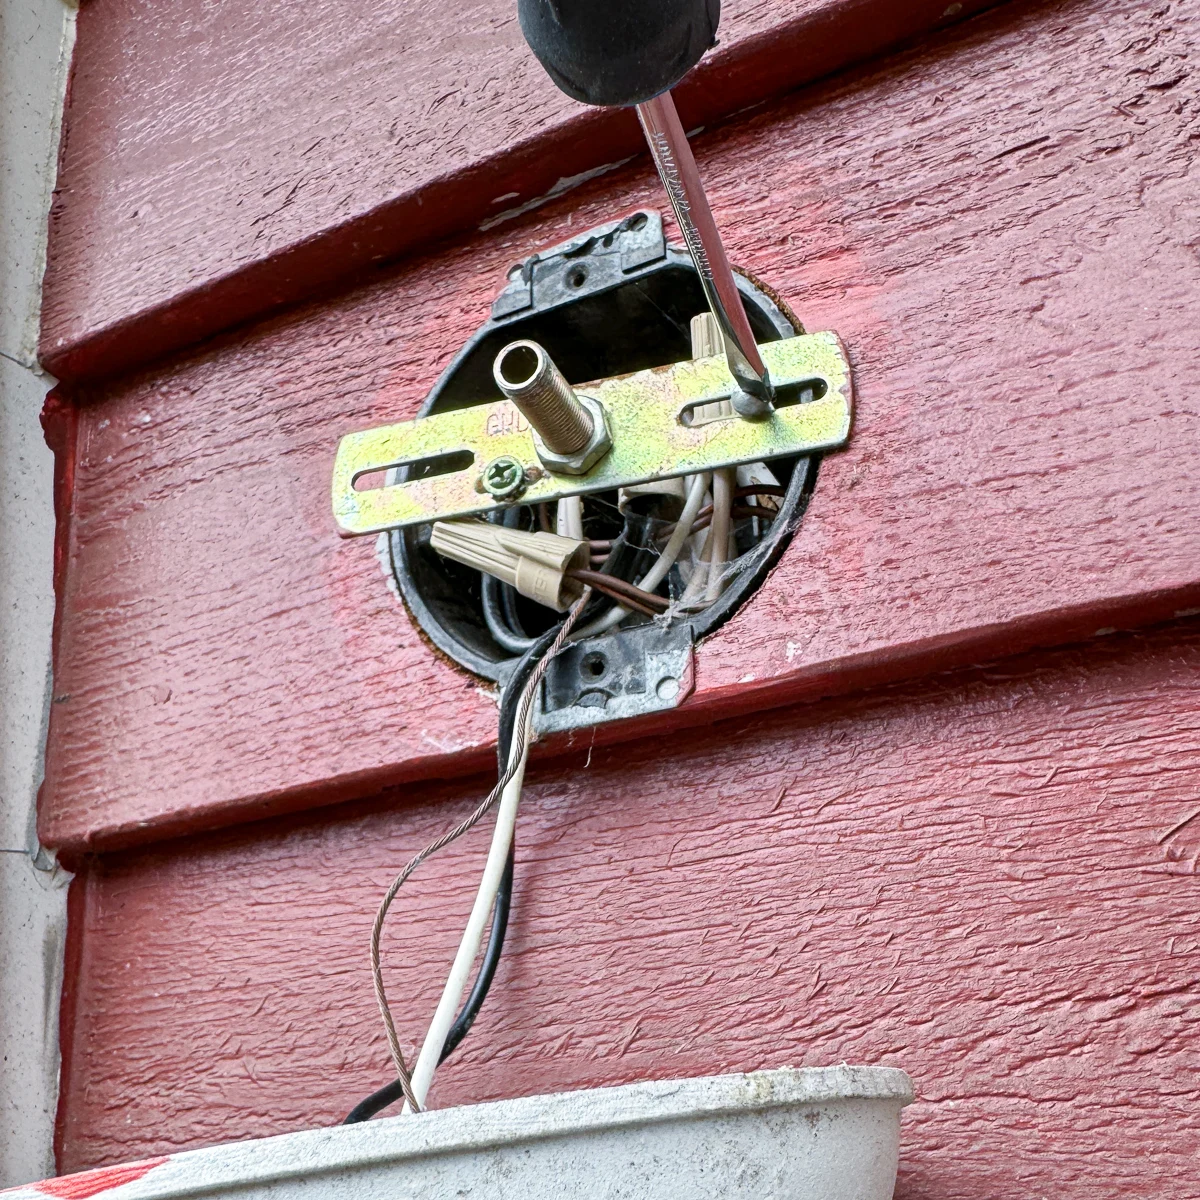 unscrewing the mounting bracket from the electrical box of an outdoor light fixture